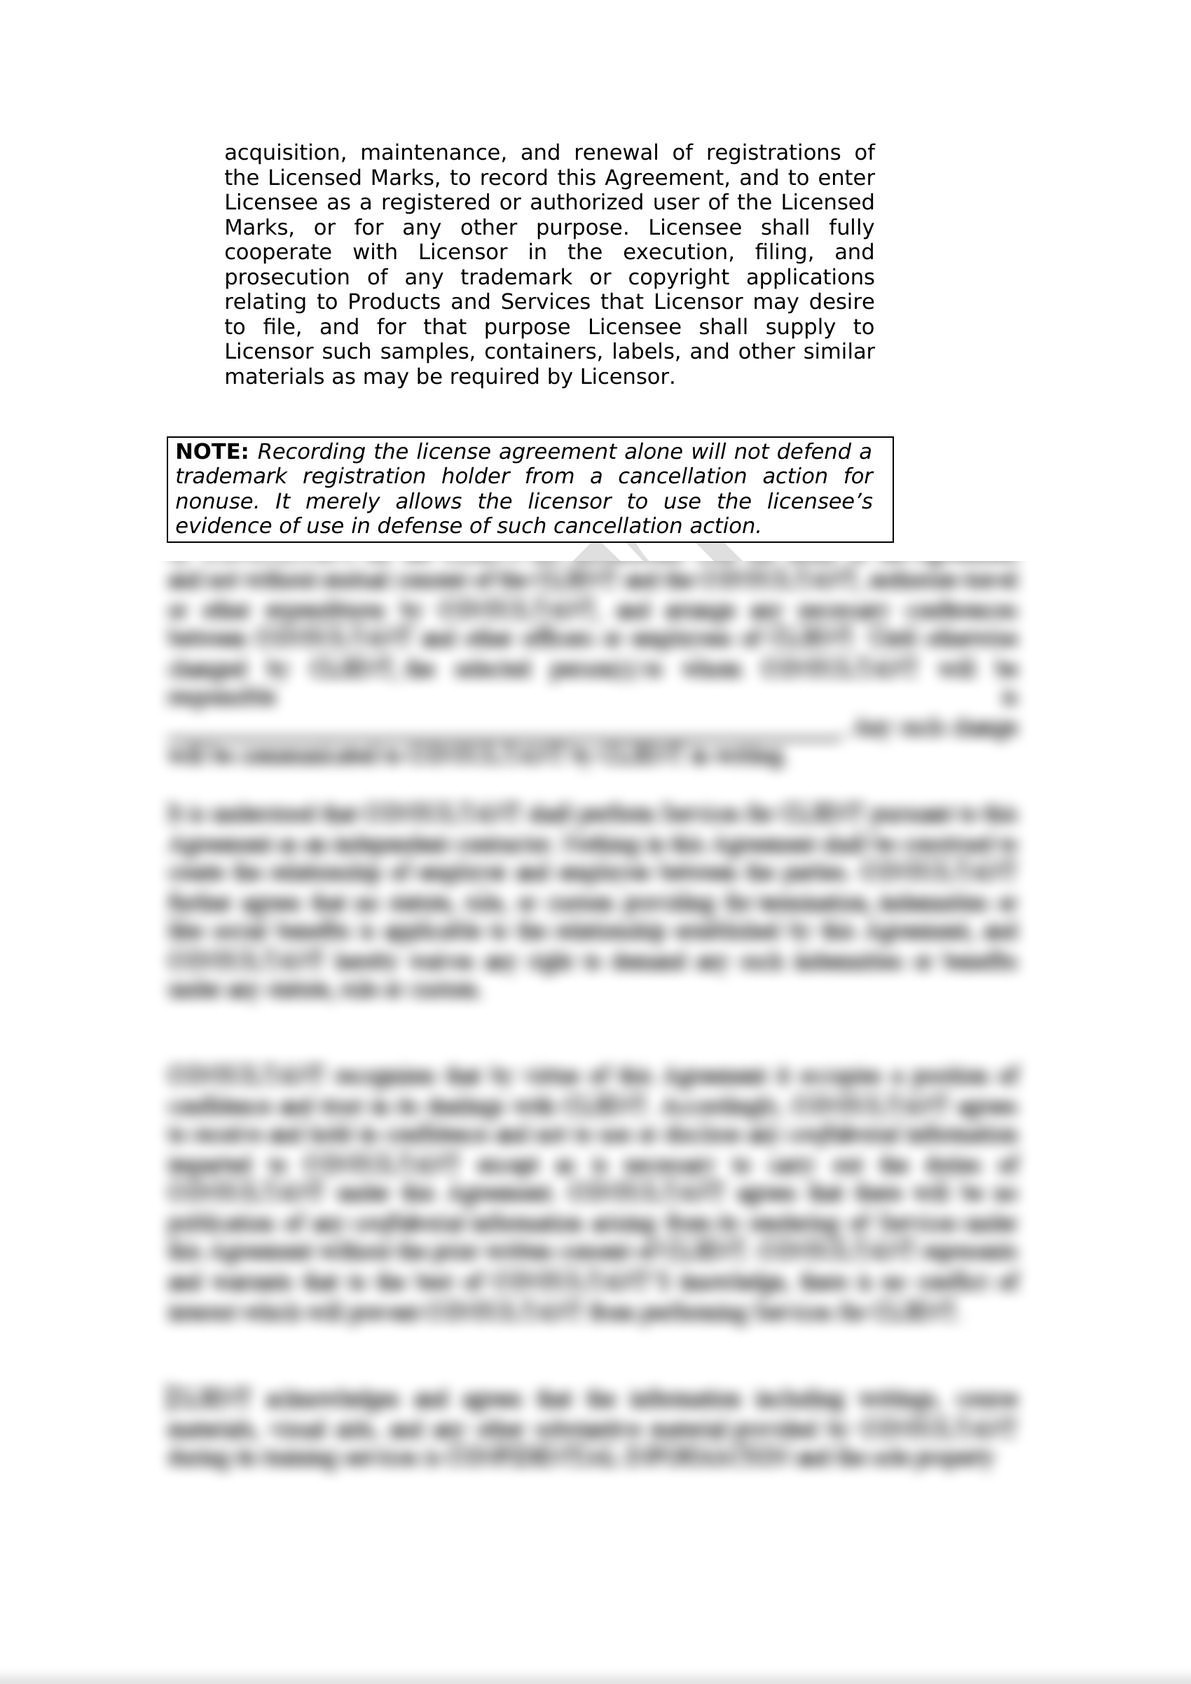 Inter-Company Intellectual Property Licensing Agreement-8